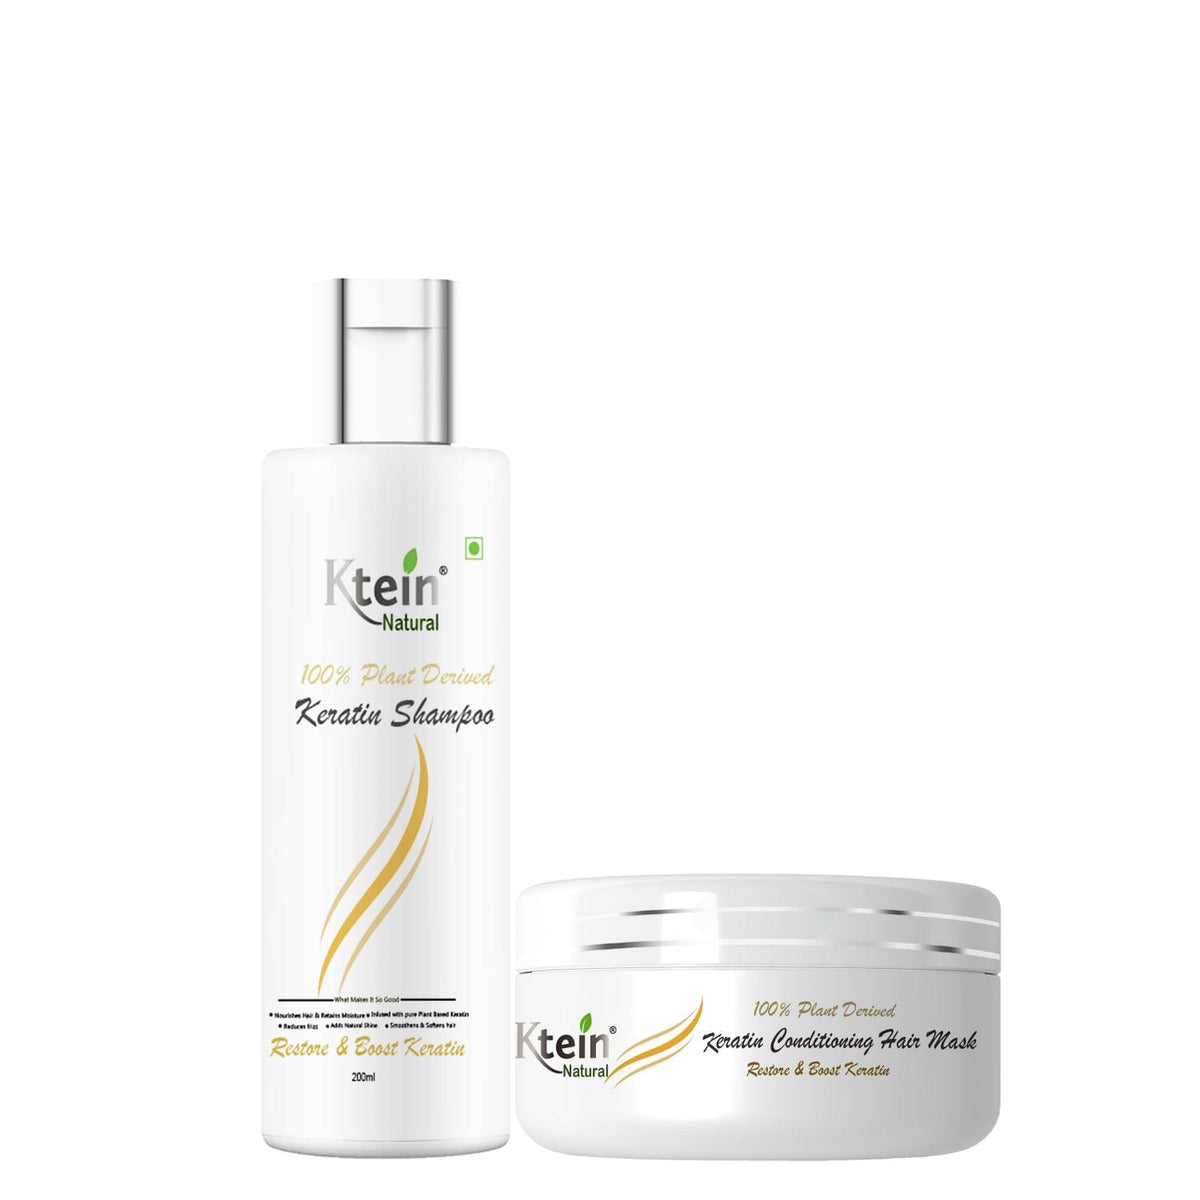 100% Plant Derived Keratin Shampoo & Conditioner Combo - 200ml - Ktein Cosmetics By Ktein Biotech Private Limited